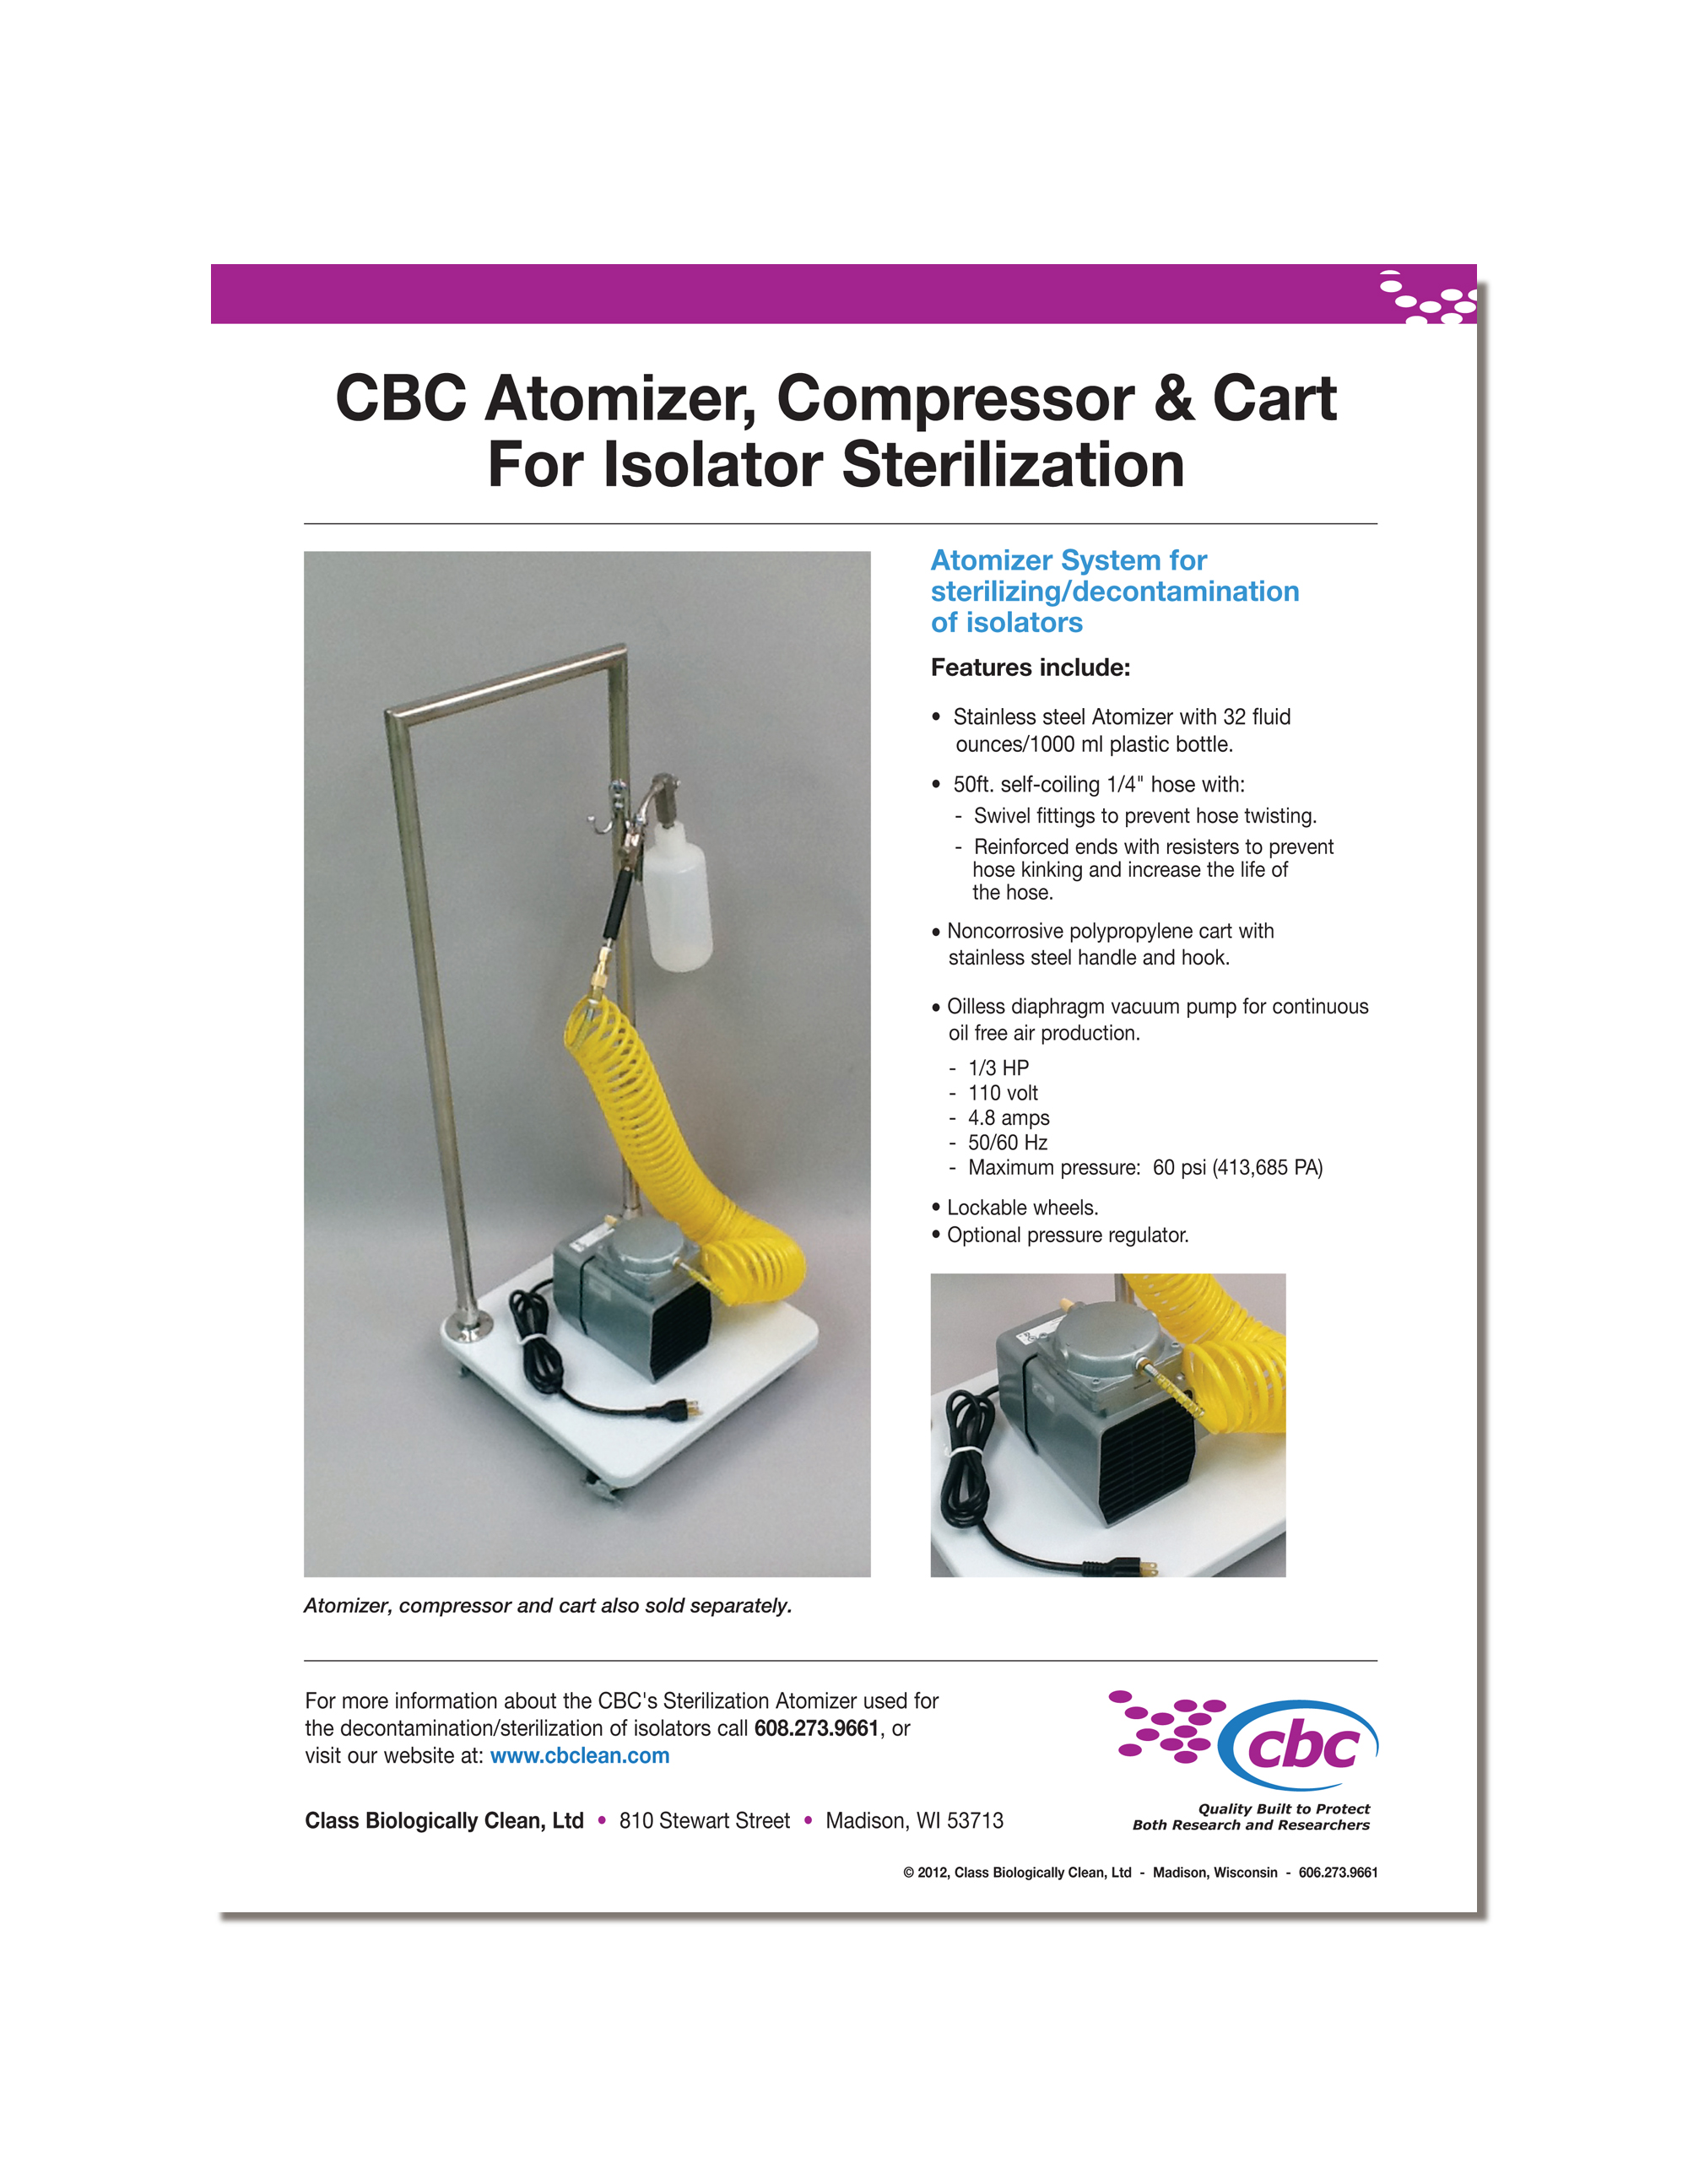 Download a printable flyer about the CBC atomizer used to sterilize/decontaminate isolator canopies. Click here to download flyer.